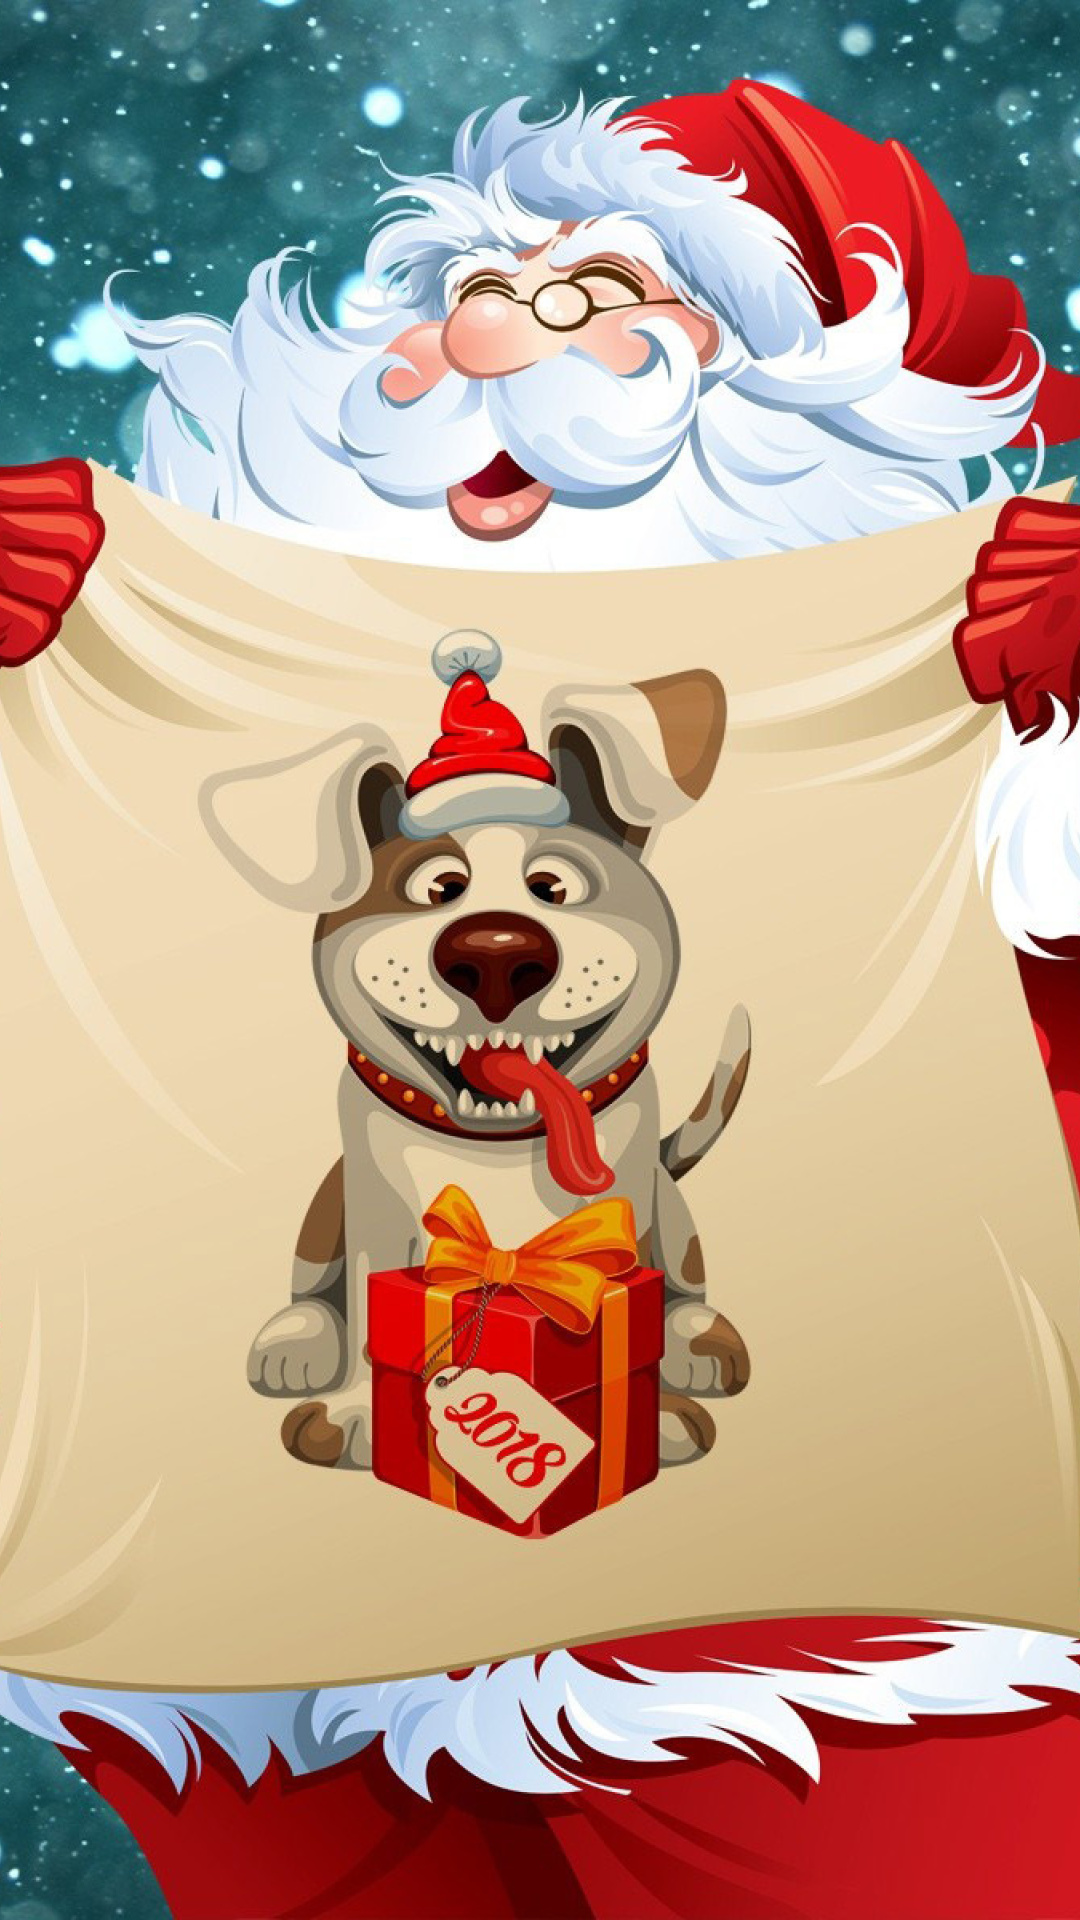 Das Happy New Year 2018 with Dog and Santa Wallpaper 1080x1920